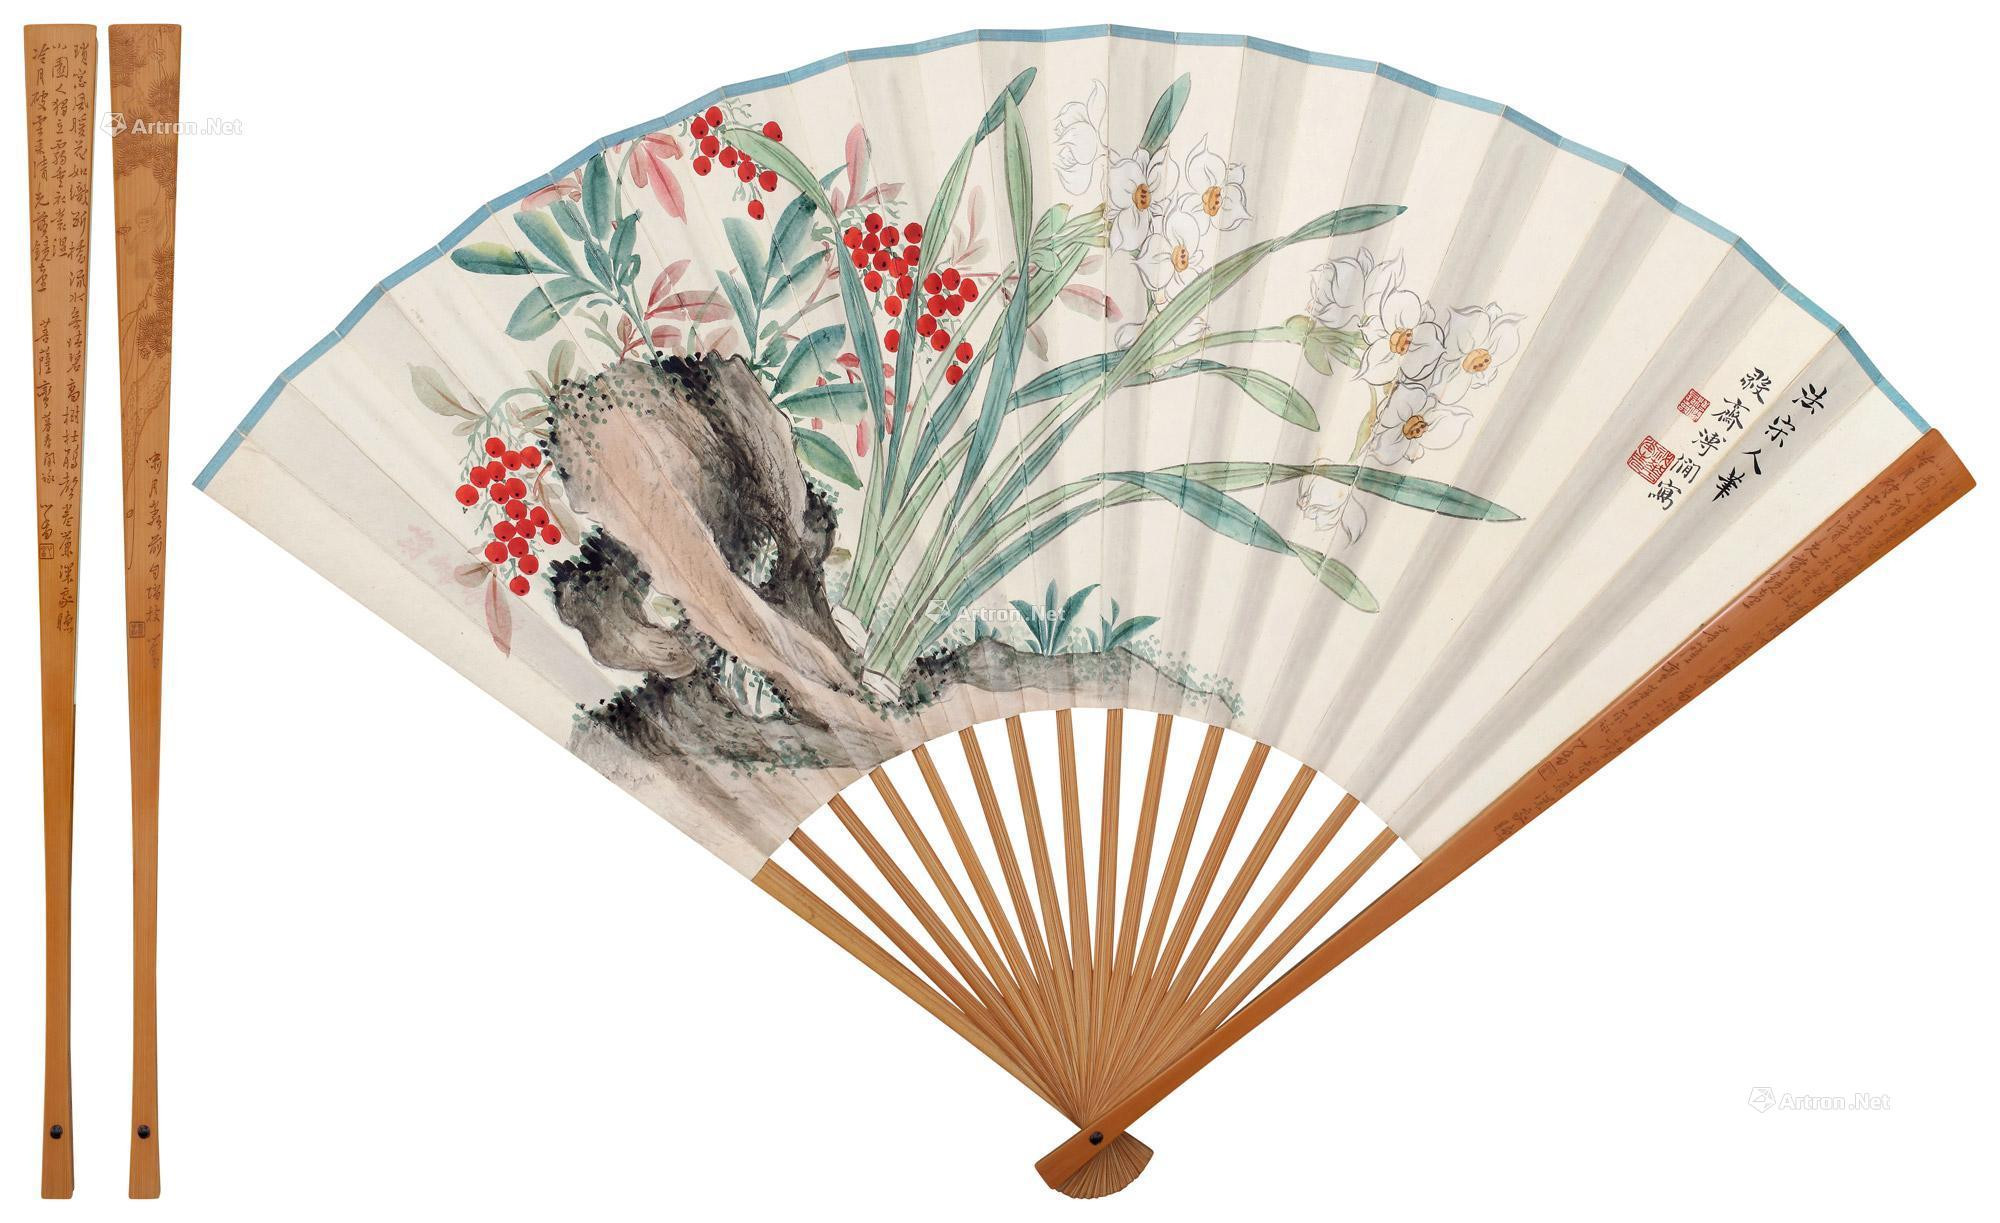 A BAMBOO FAN RIB CARVED WITH PU XINYU’S MONKEY AND PINE AND CALLIGRAPHY IN RUNNING SCRIPT